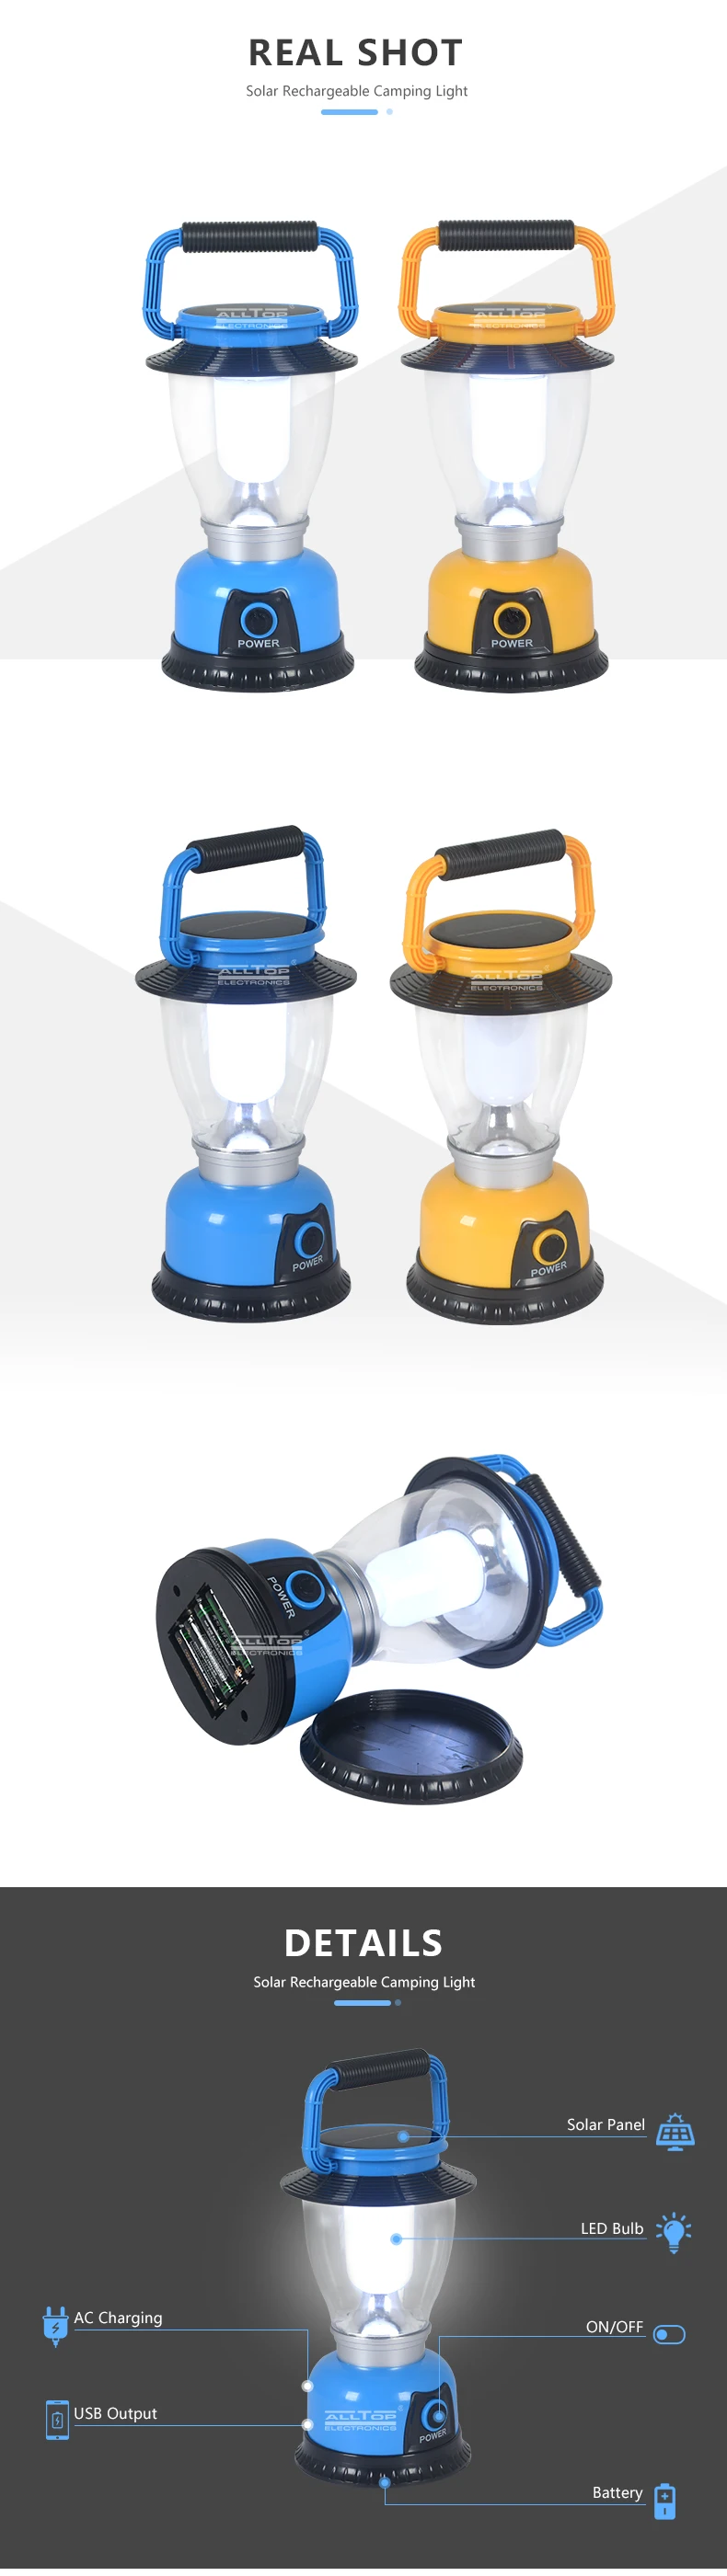 ALLTOP Outdoor Hand Power Generation LED hanging lanterns rechargeable Solar Camping Light